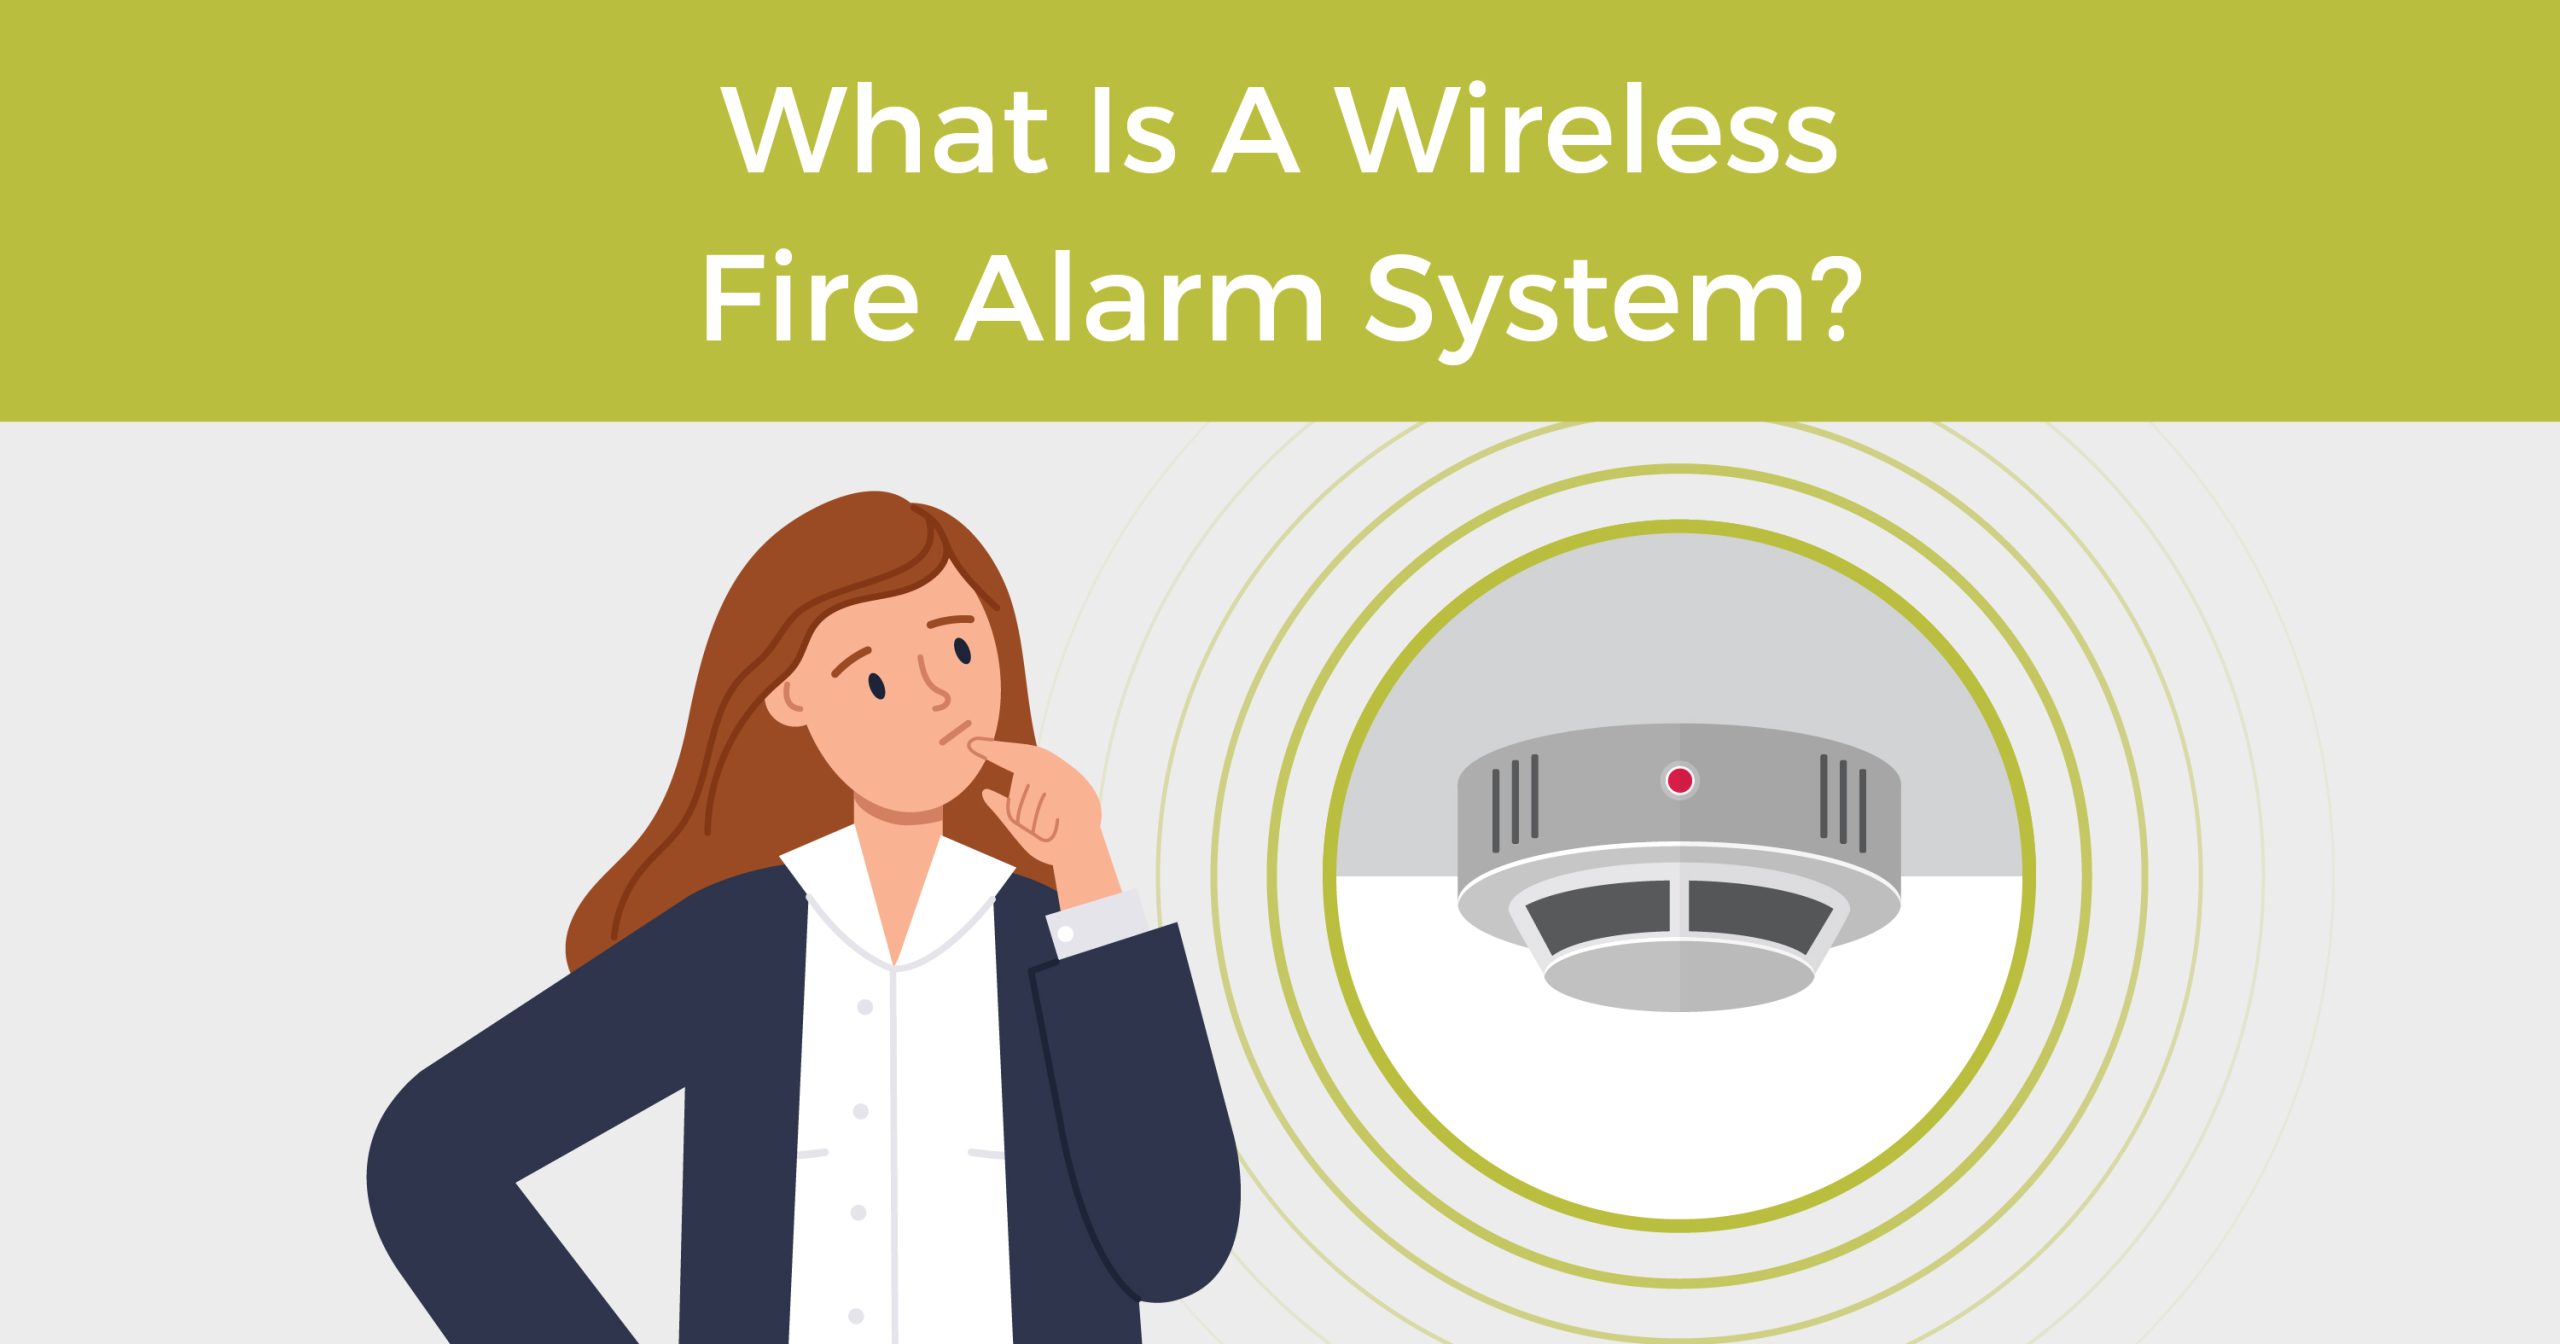 What is a wireless fire alarm system?